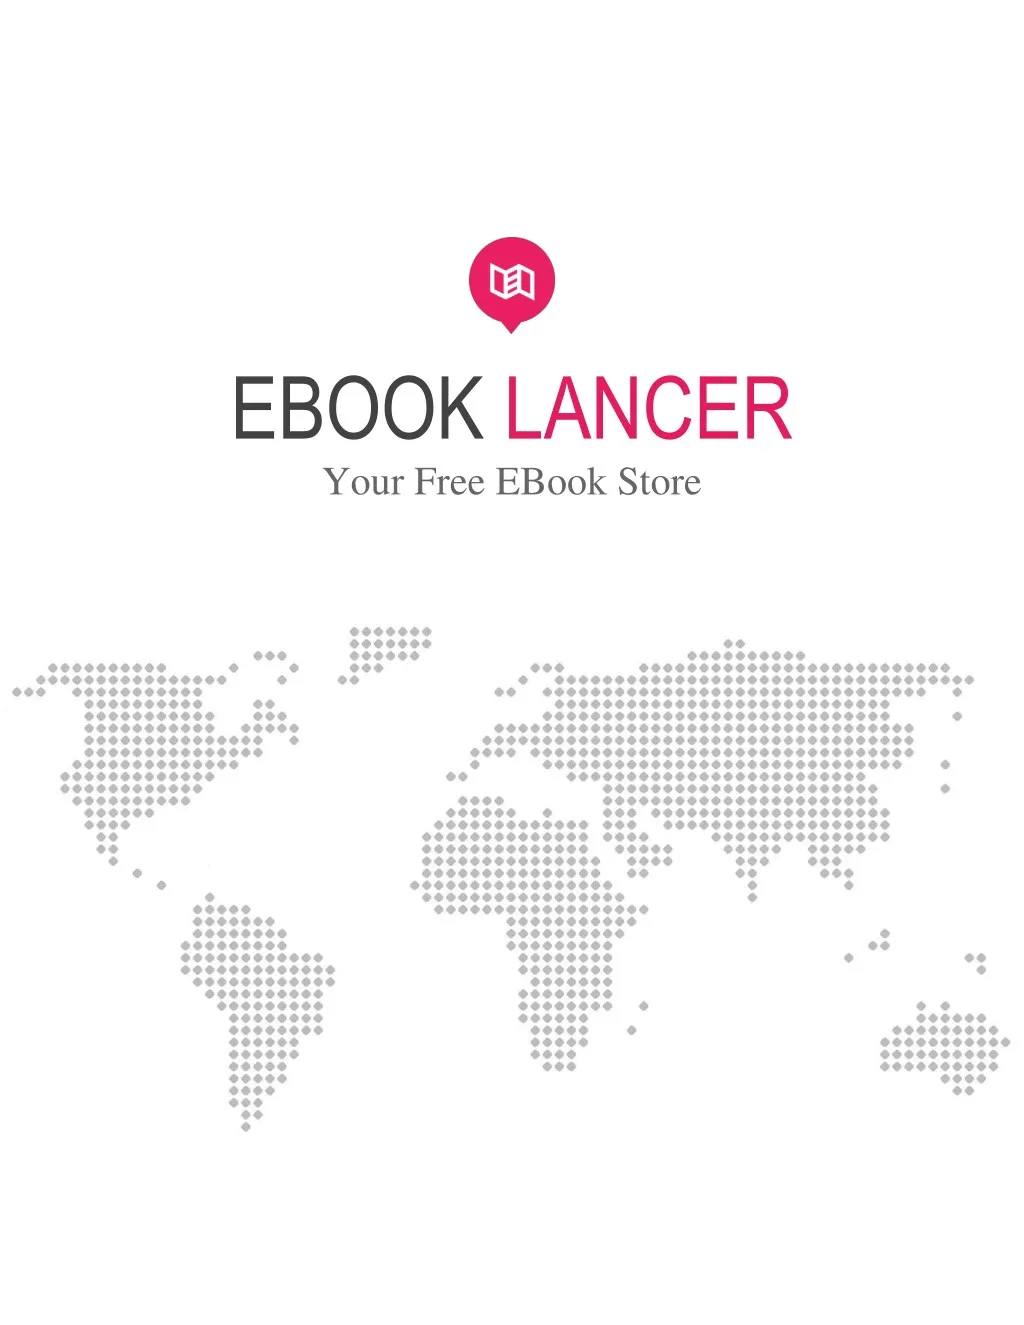 ebook lancer your free ebook store